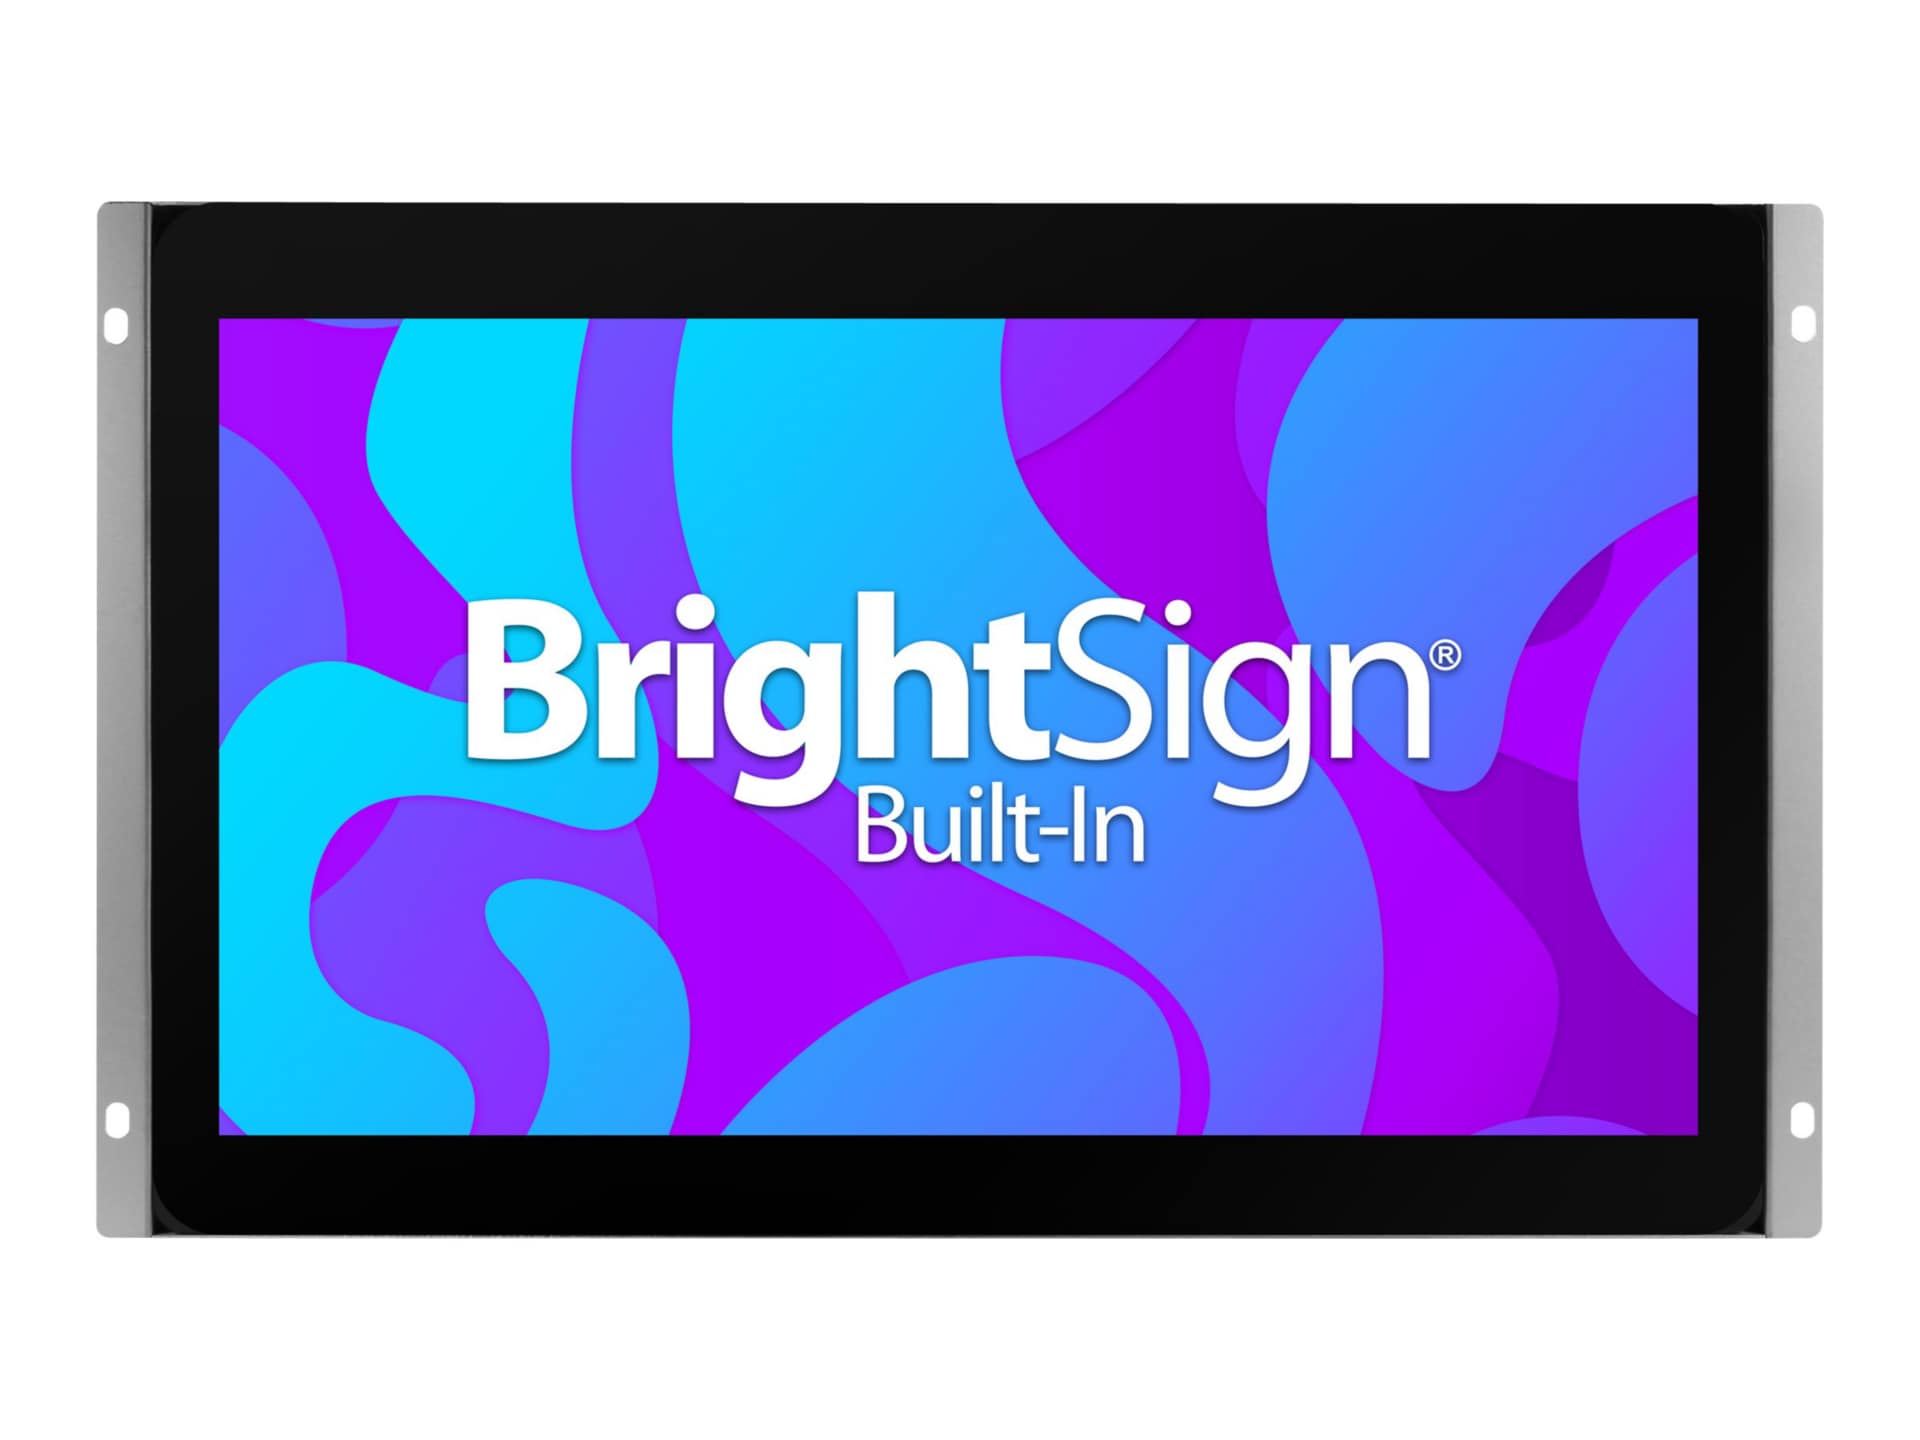 Bluefin BrightSign Built-In Touch PoE 13.3" LCD flat panel display - Full H